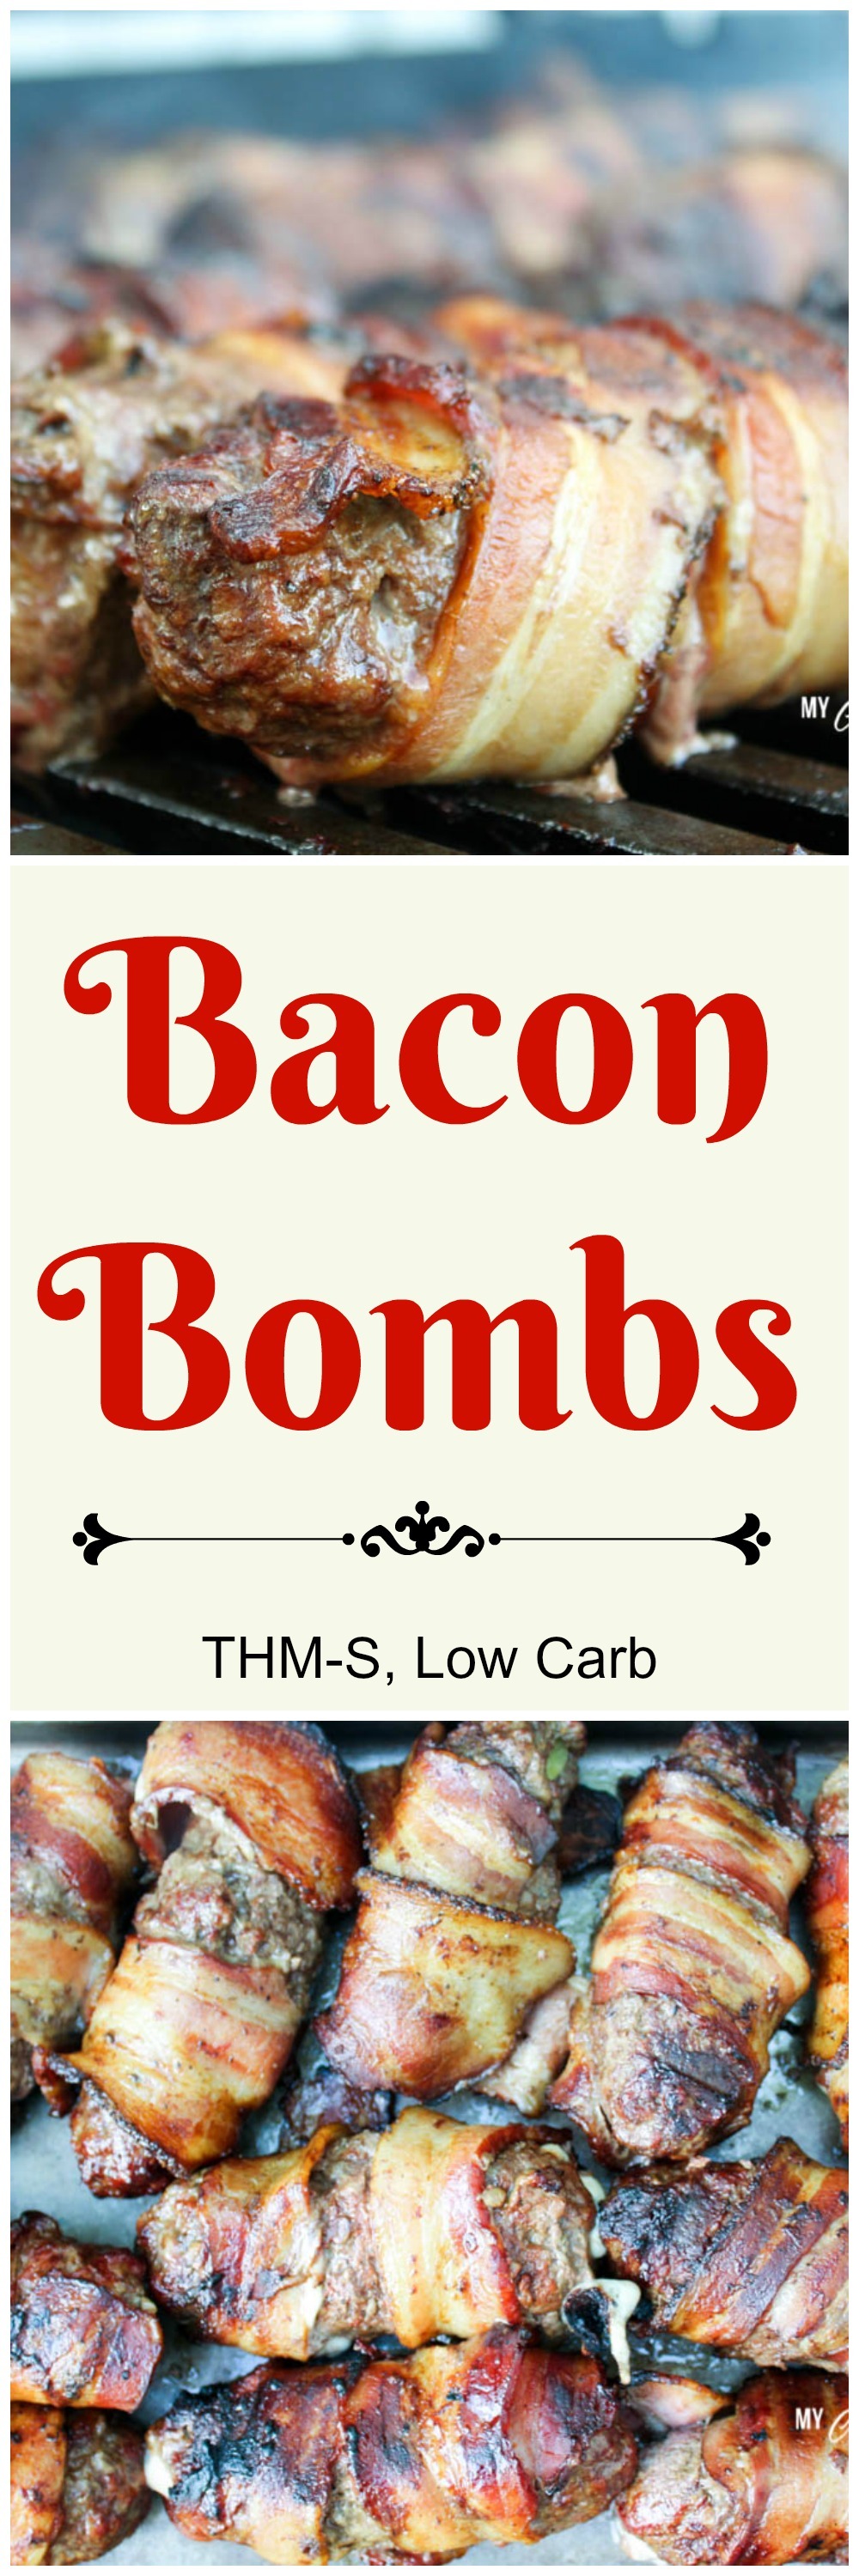 Bacon Bombs (THM-S, Low Carb)